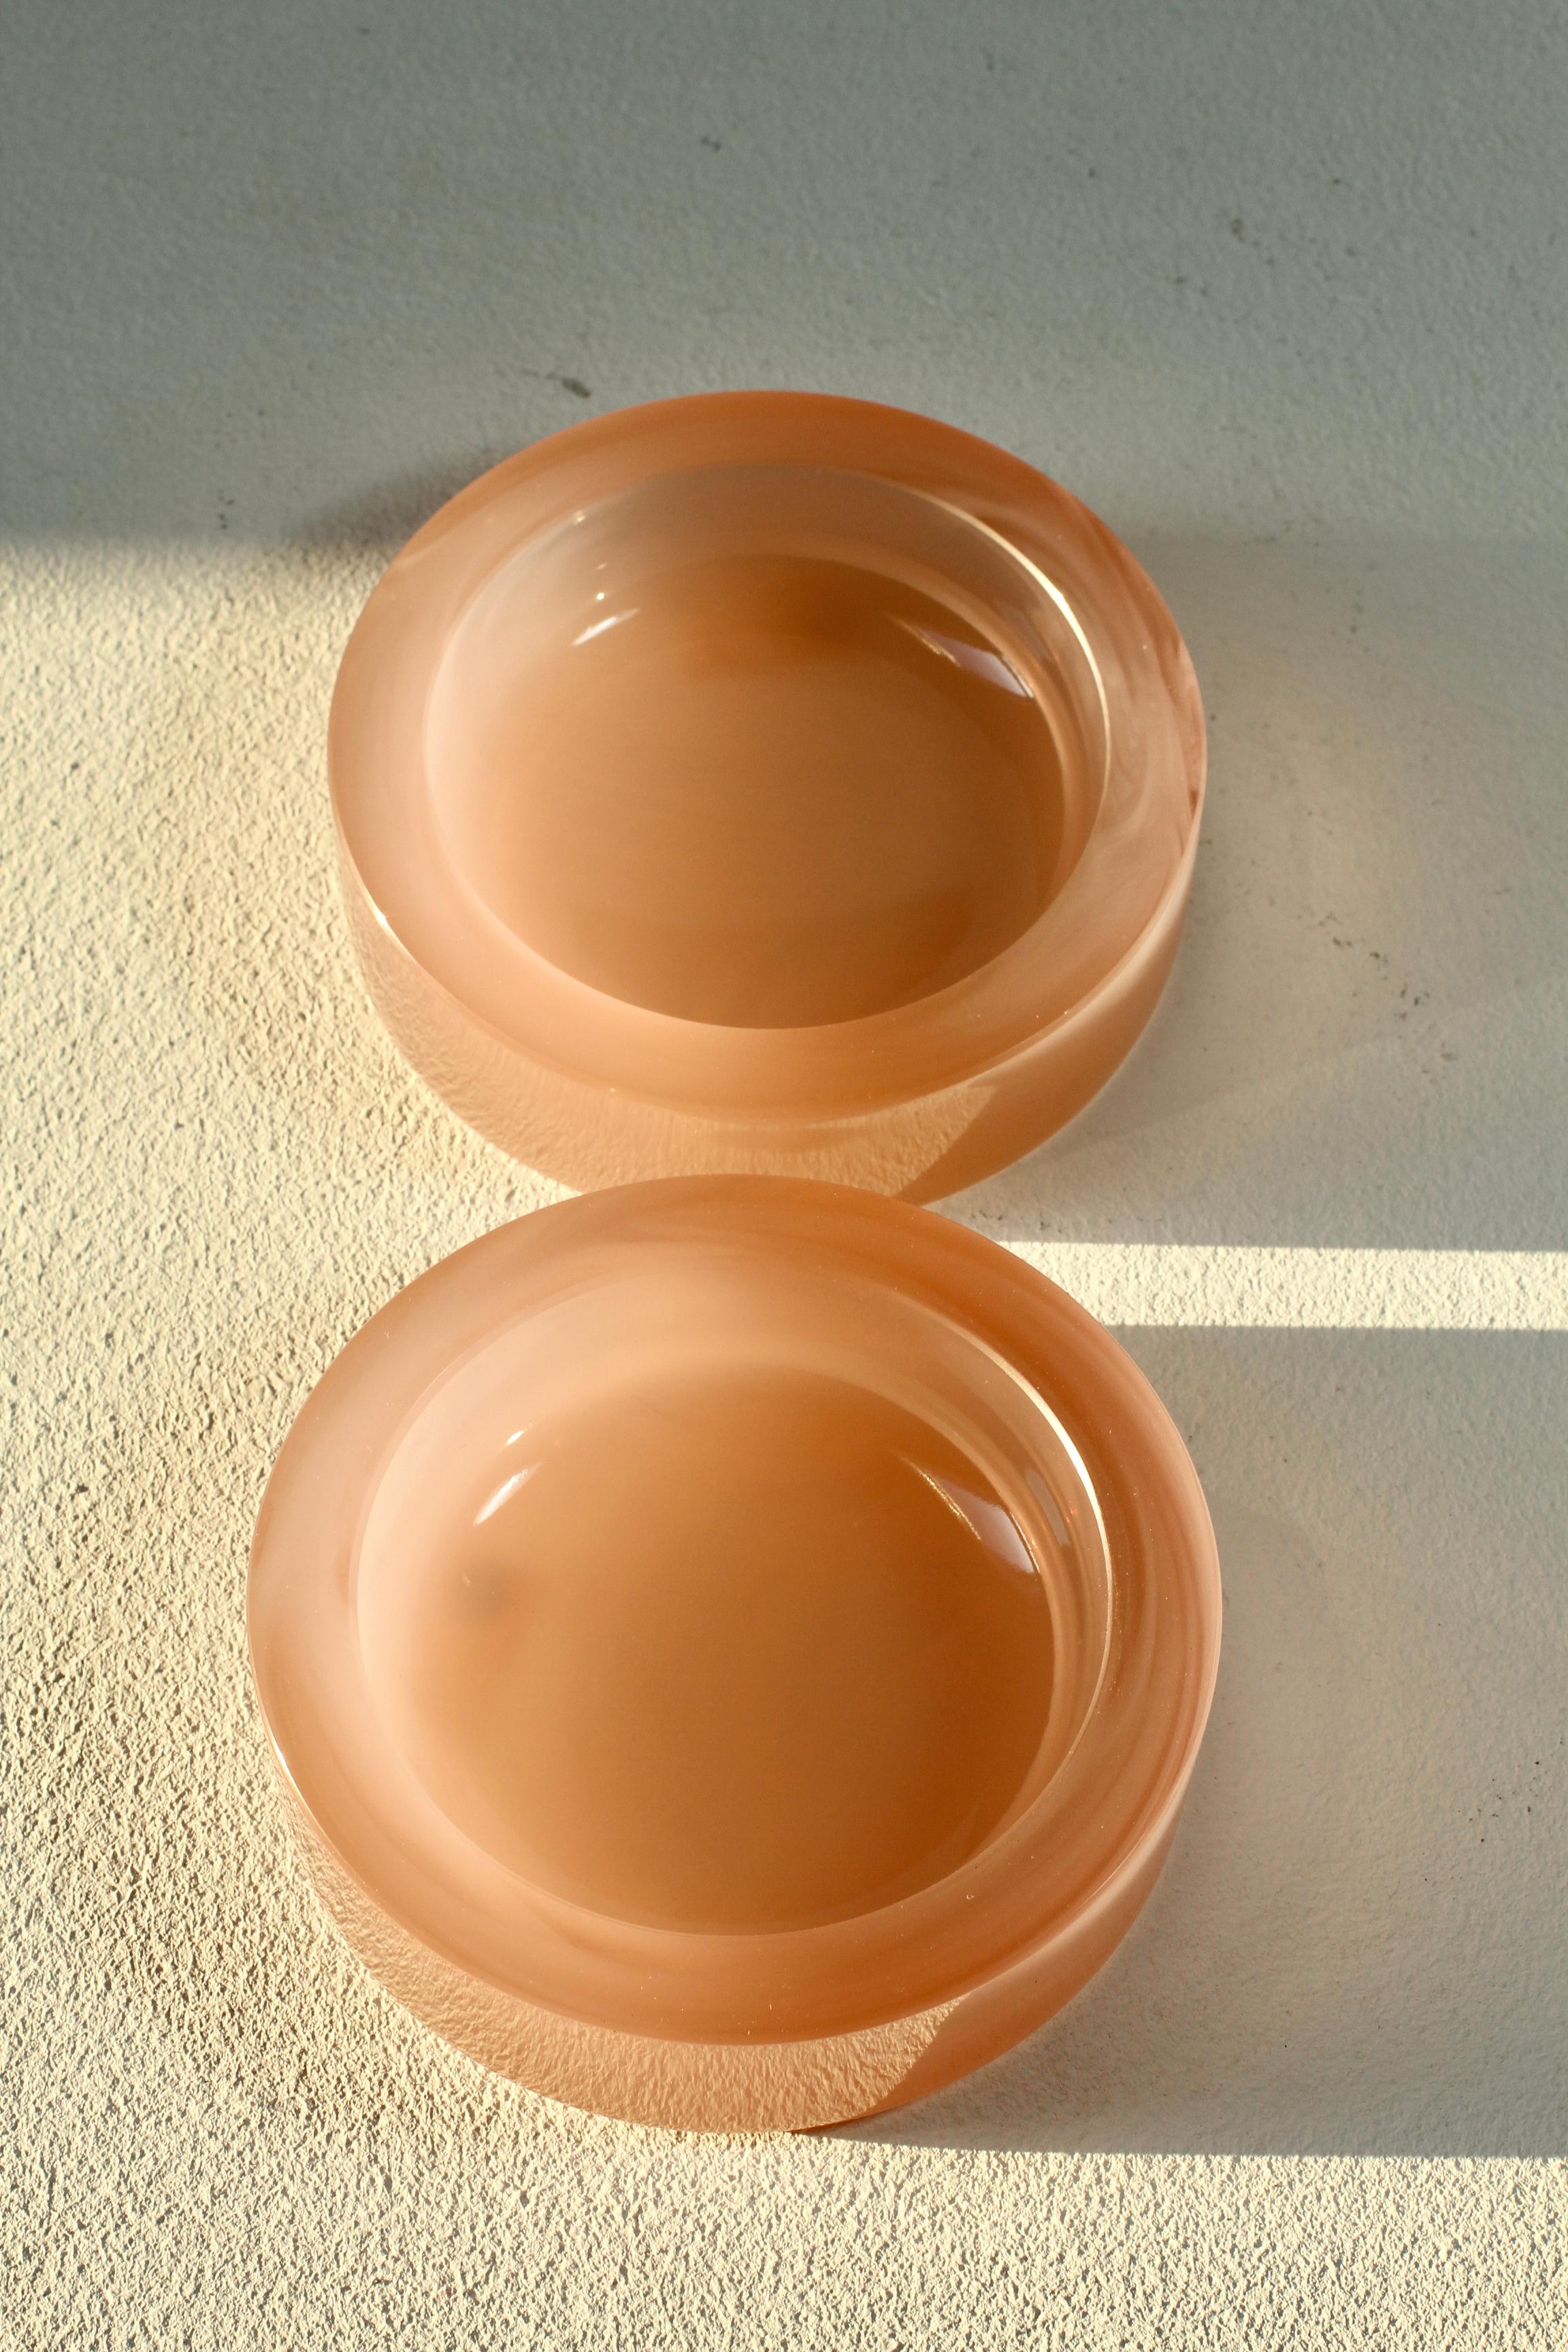 Cenedese Vintage Pink Pair of Opaline Murano Glass Dishes, Bowls, Ashtrays 1970s For Sale 1